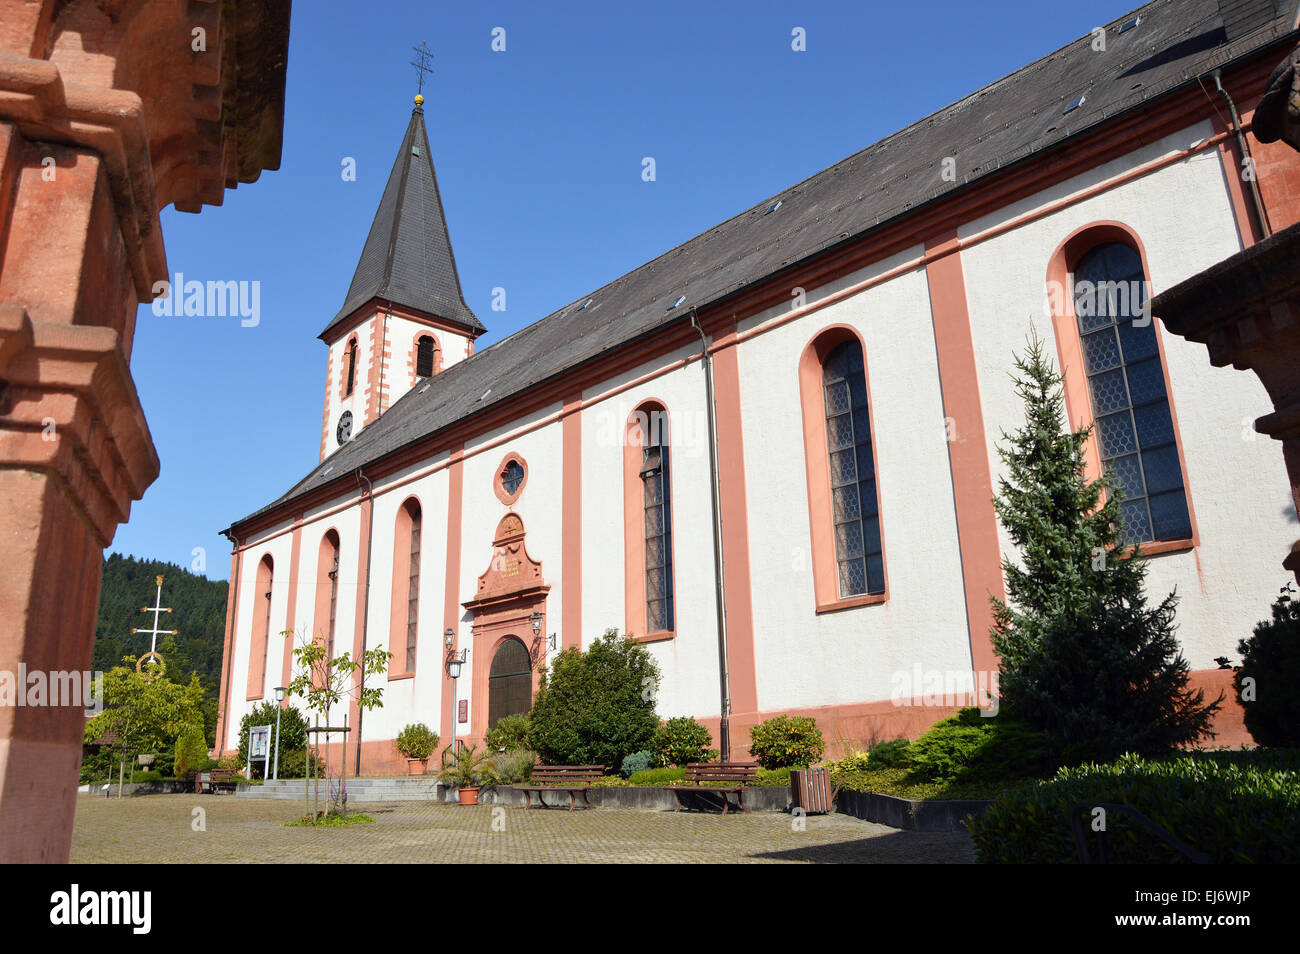 Catholic Church of St Symphorian in Zell am Harmersbach a small town and a historic Reichsstadt in Baden-Wurttemberg, Germany. Stock Photo